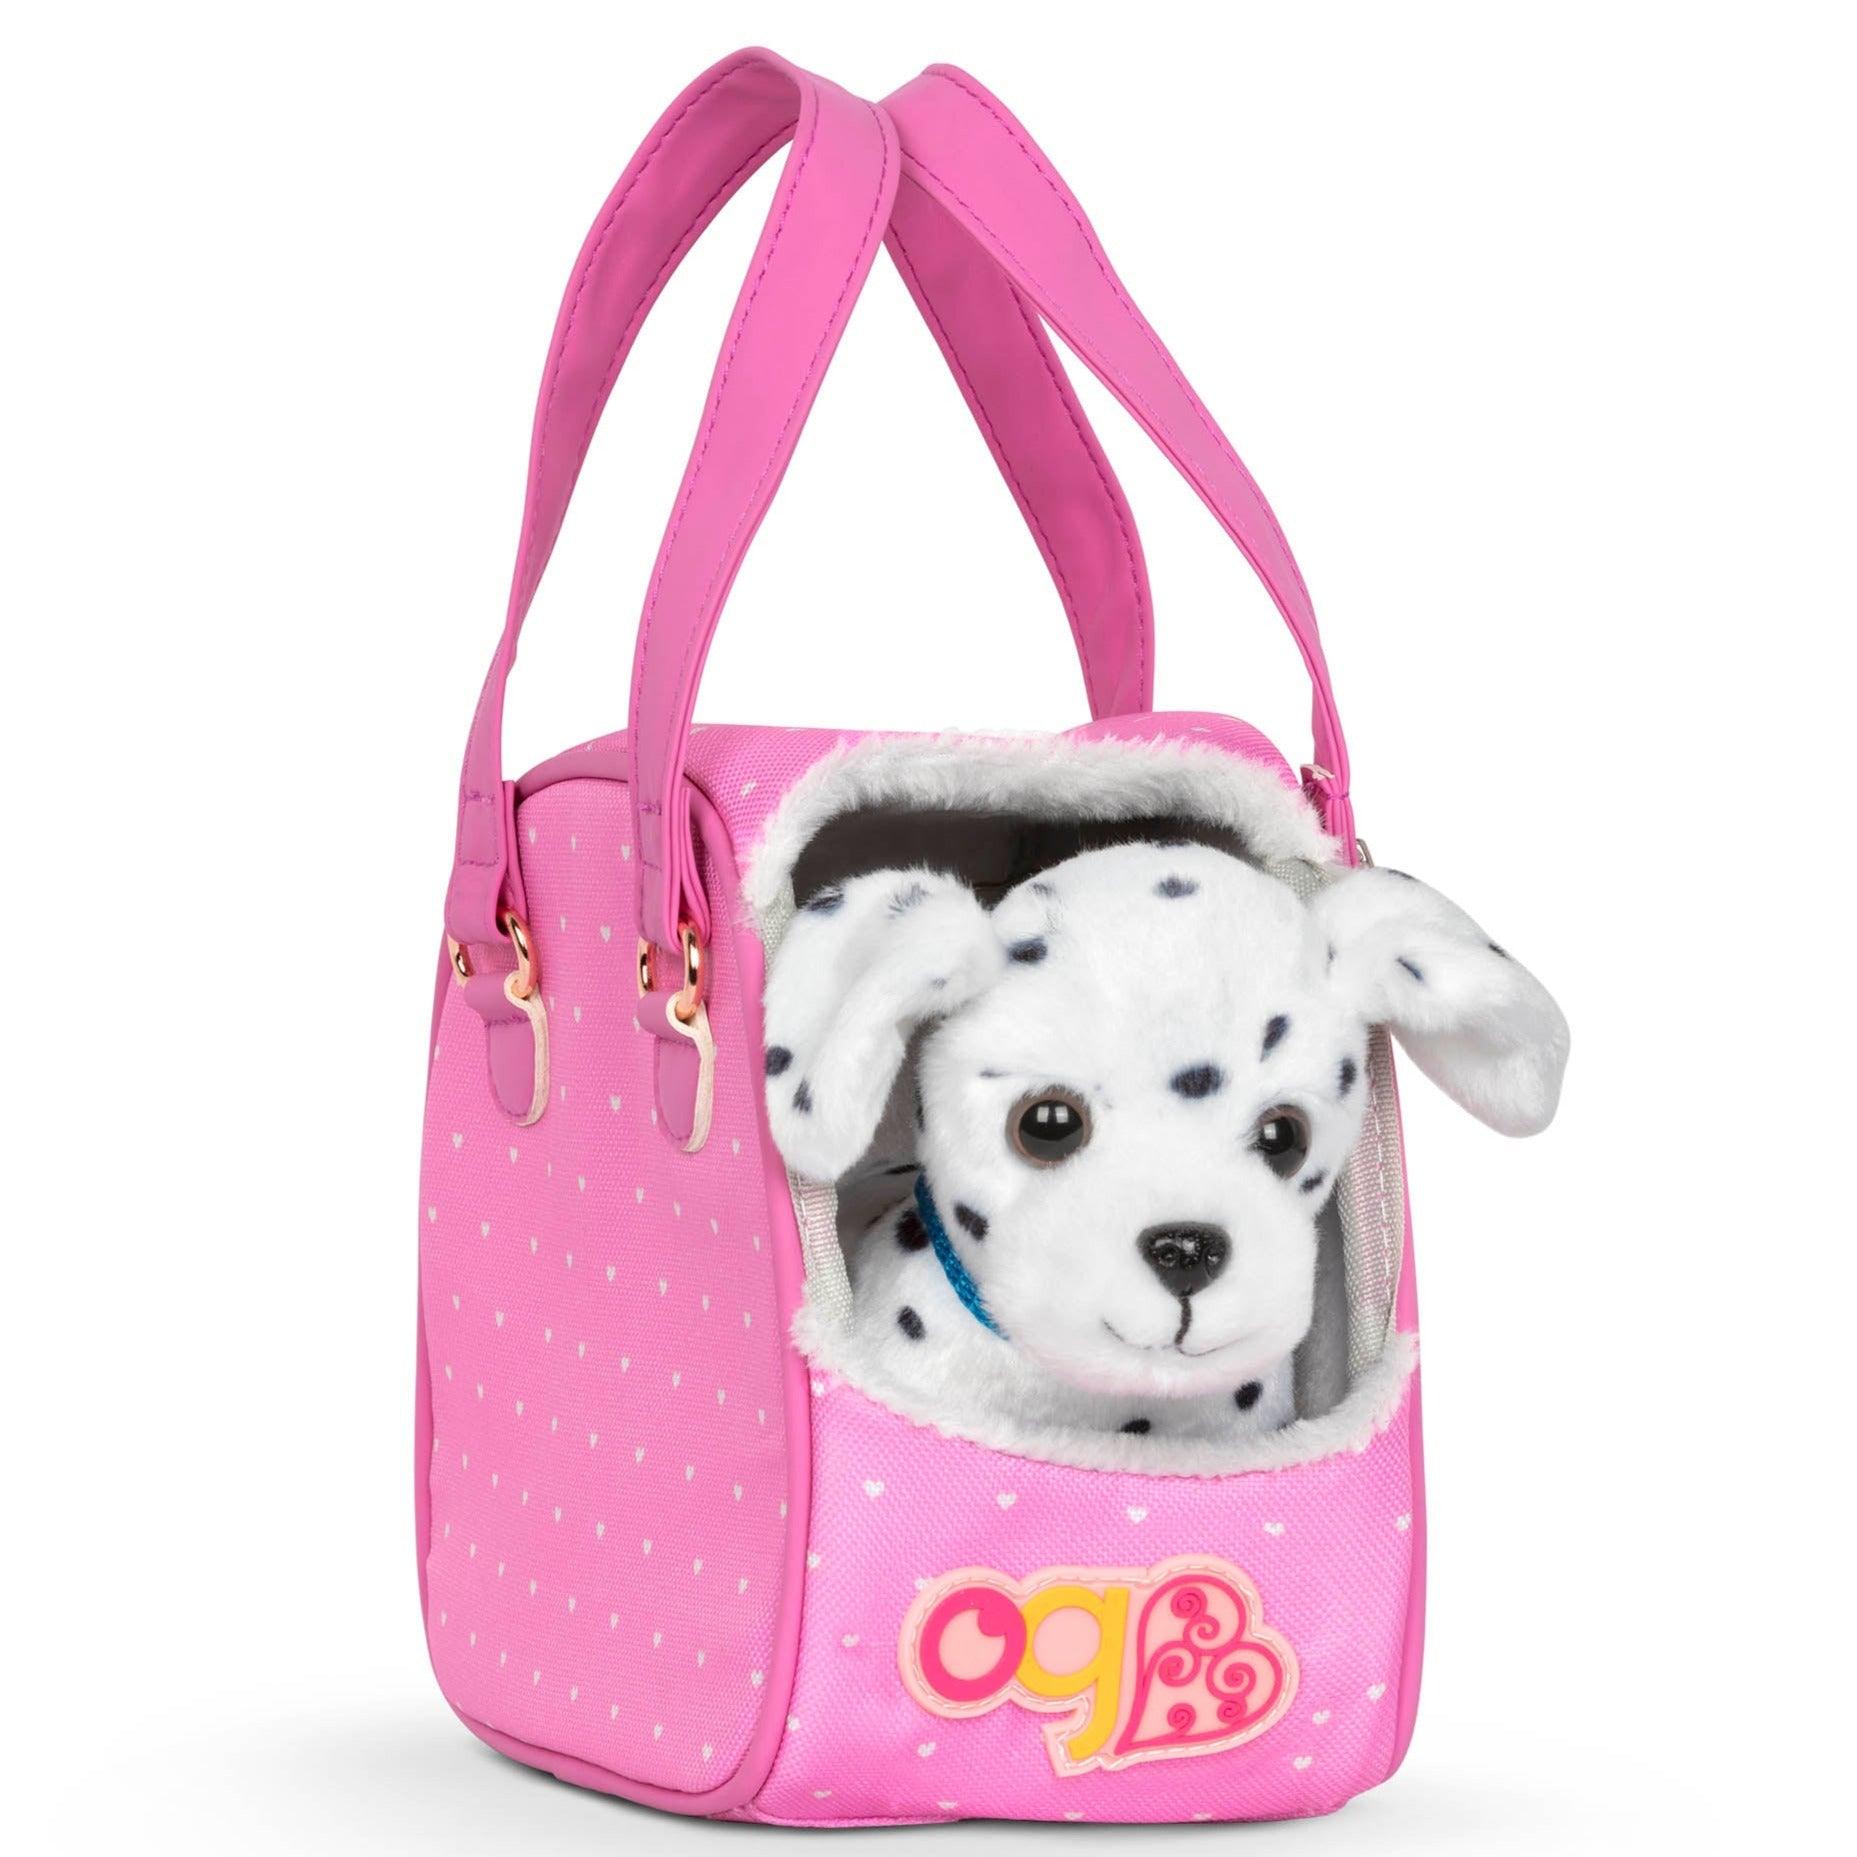 Our Generation: Dalmatian dog in a bag